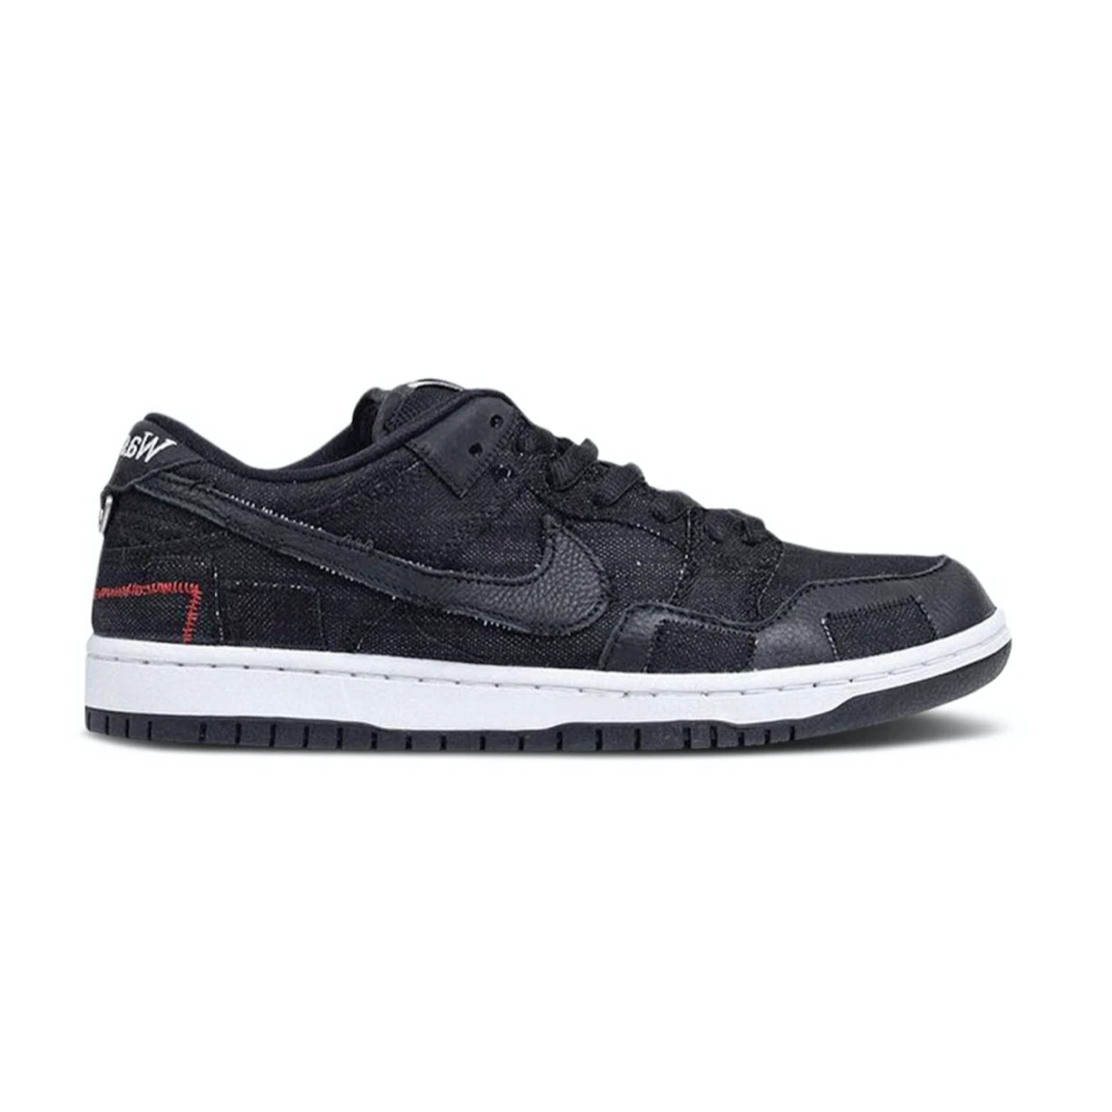 Nike SB Dunk Low Wasted Youth from Nike